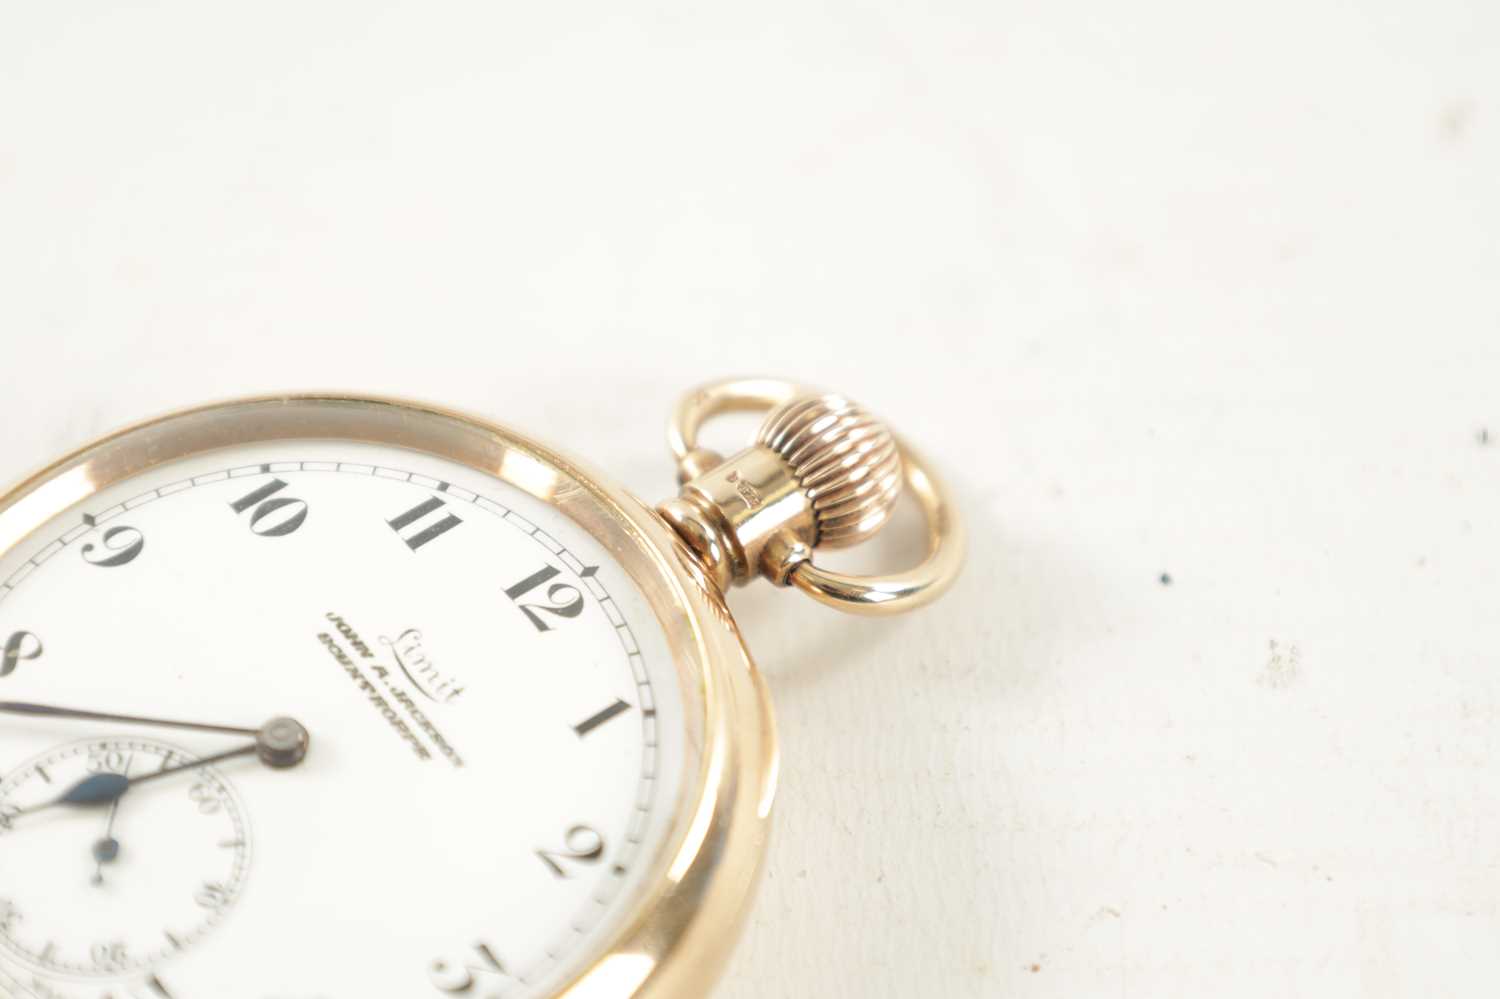 AN EARLY 20TH CENTURY LIMIT 9CT GOLD OPEN-FACED POCKET WATCH - Image 3 of 5